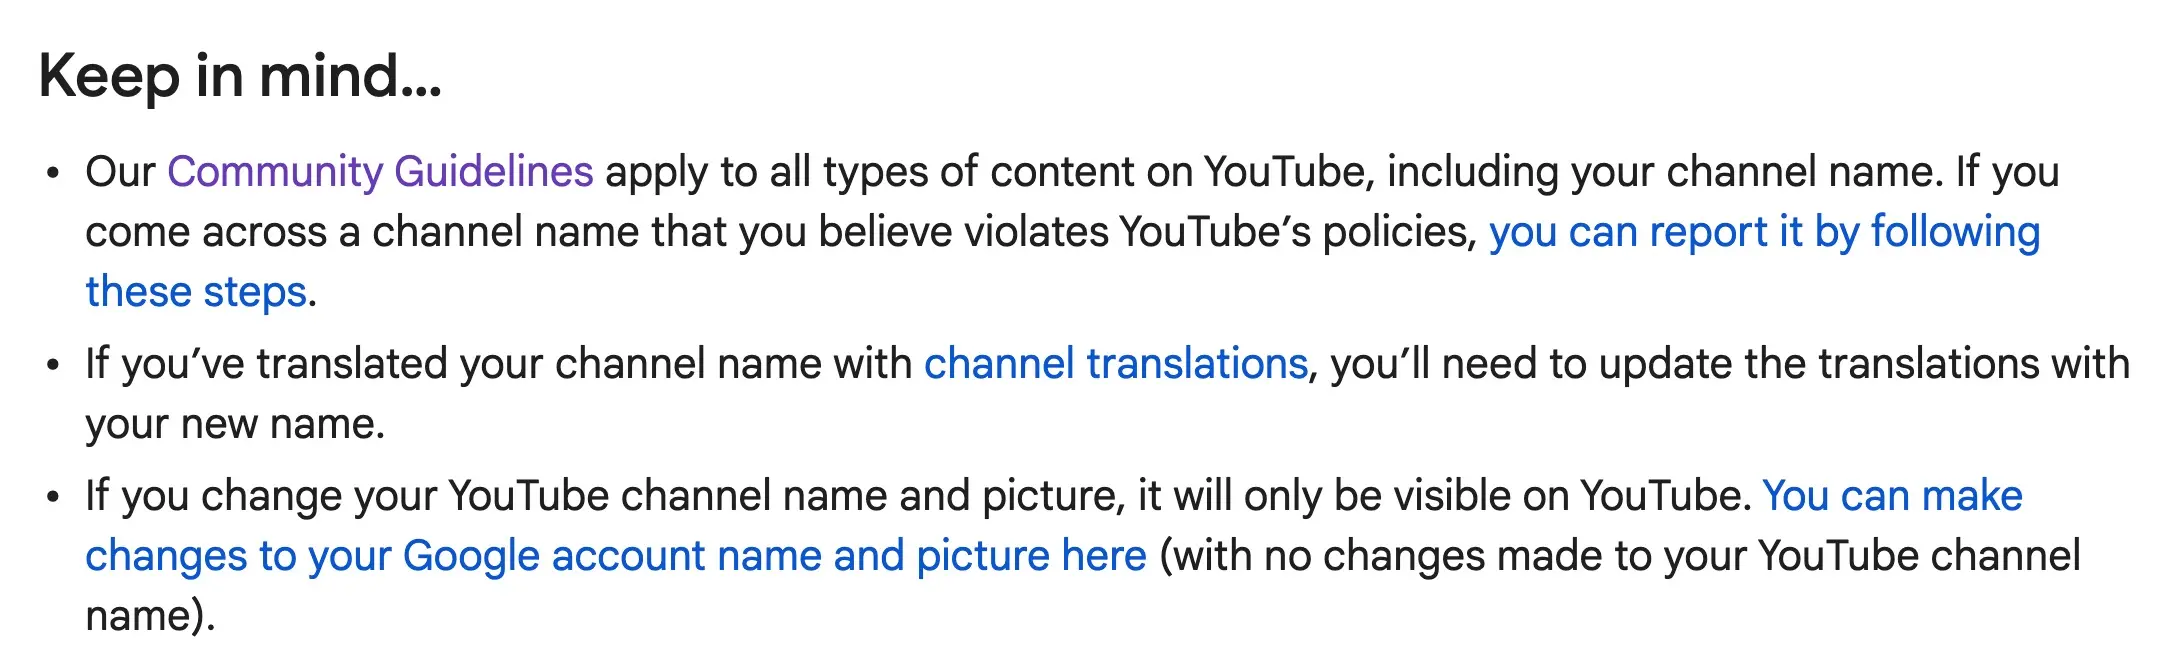 YouTube Community Guidelines